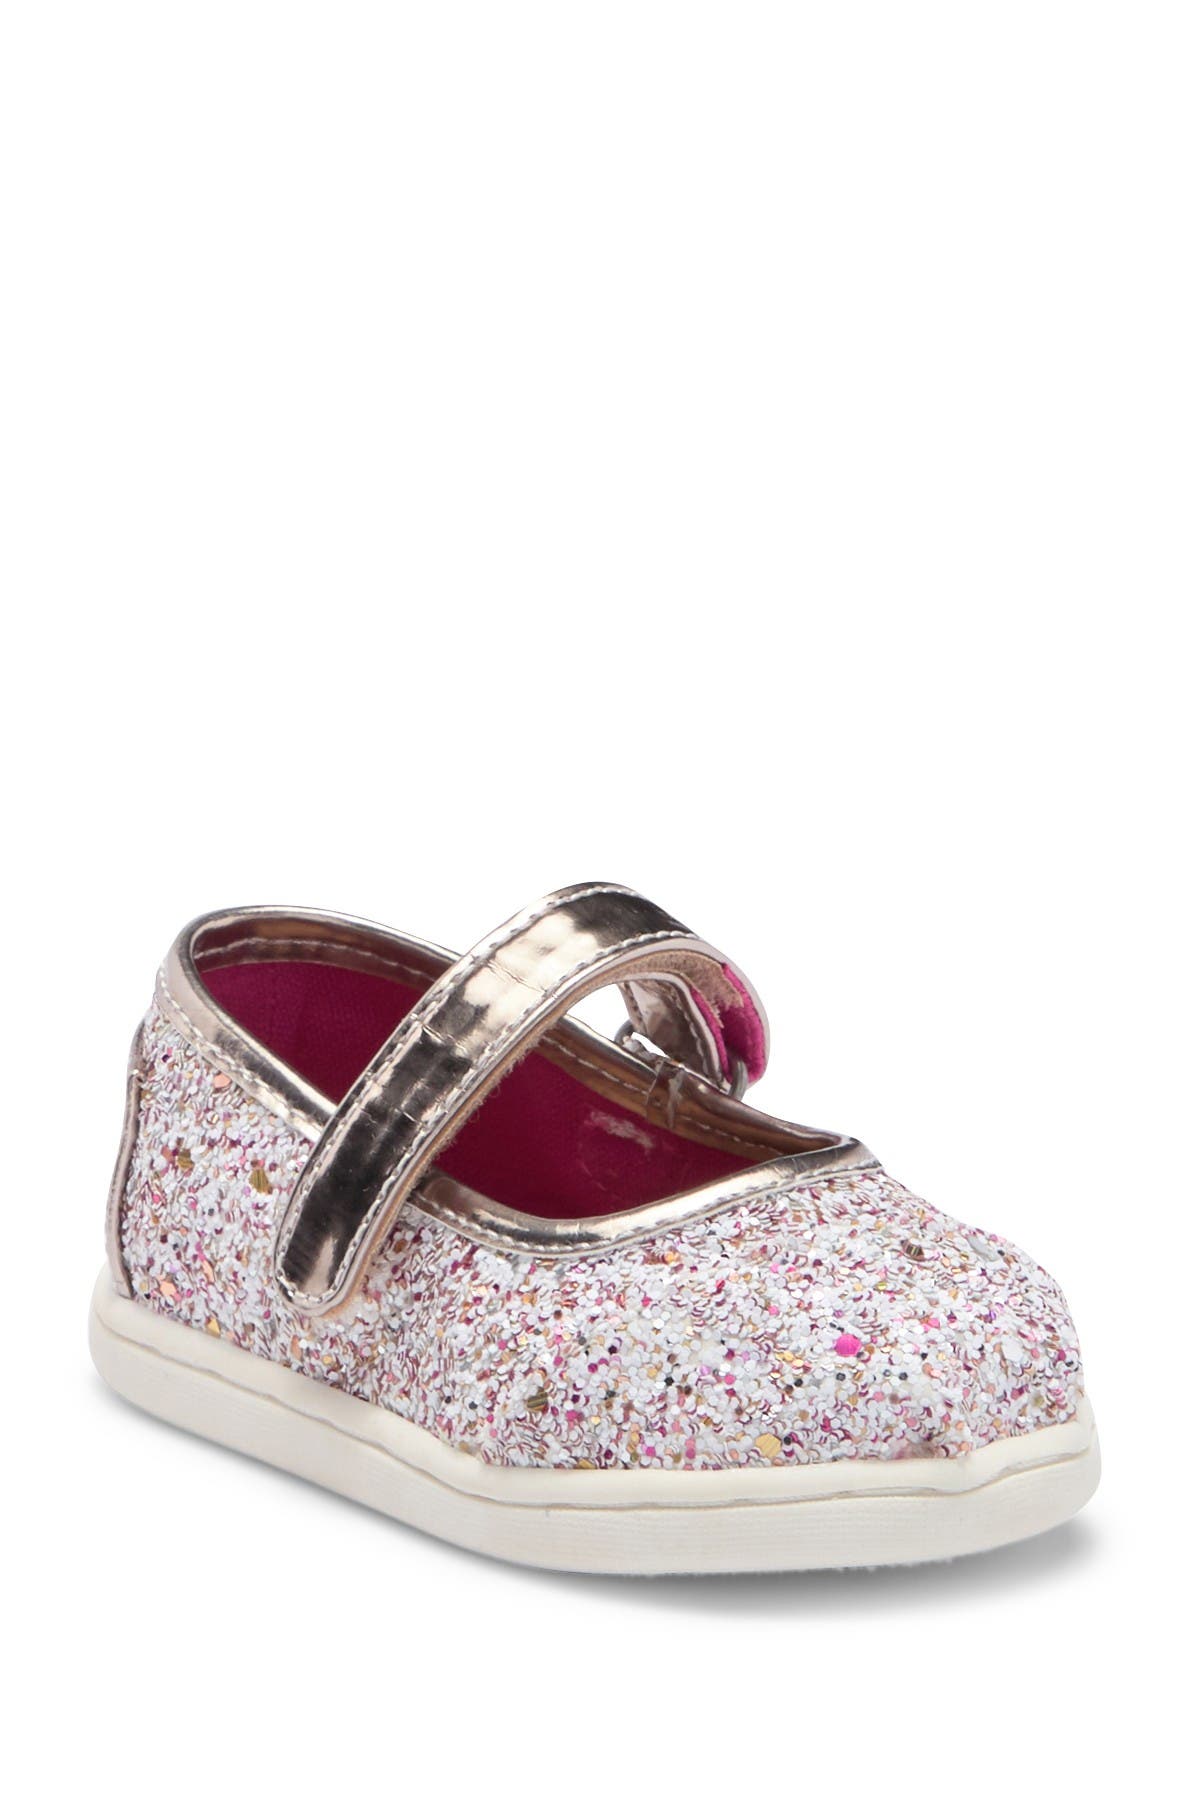 toms candy cane glitter shoes